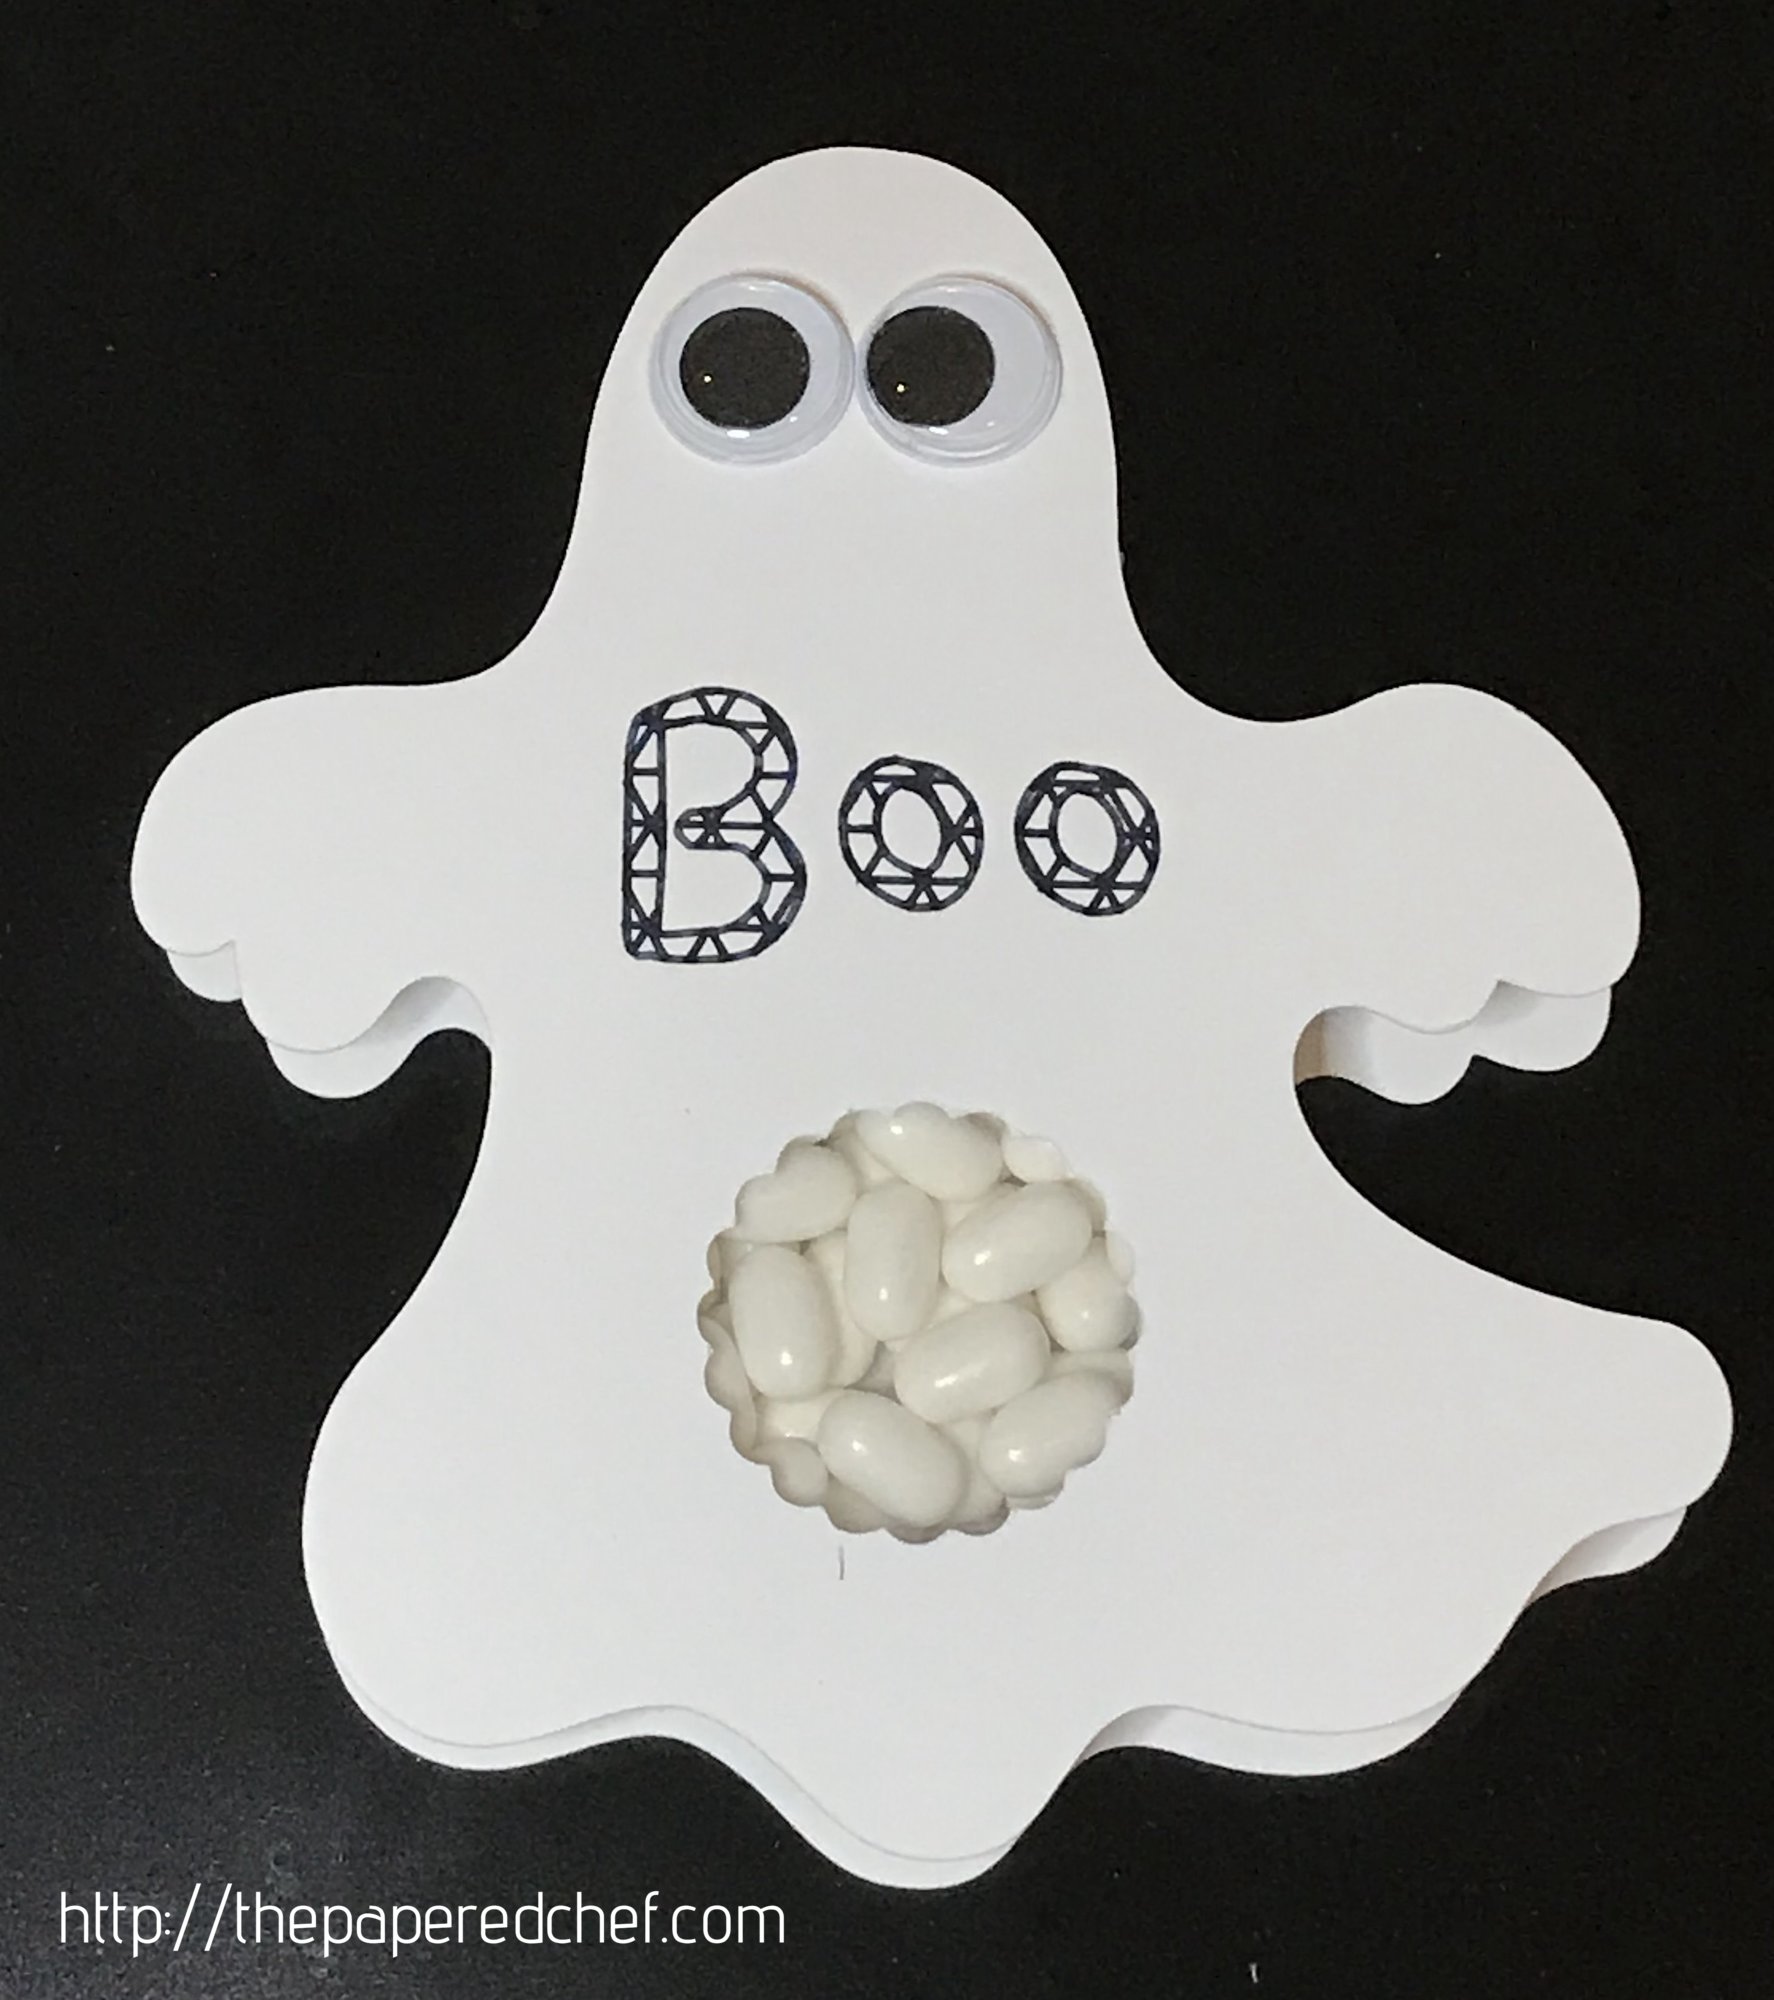 Tic-Tac Ghosts using the Brother ScanNCut